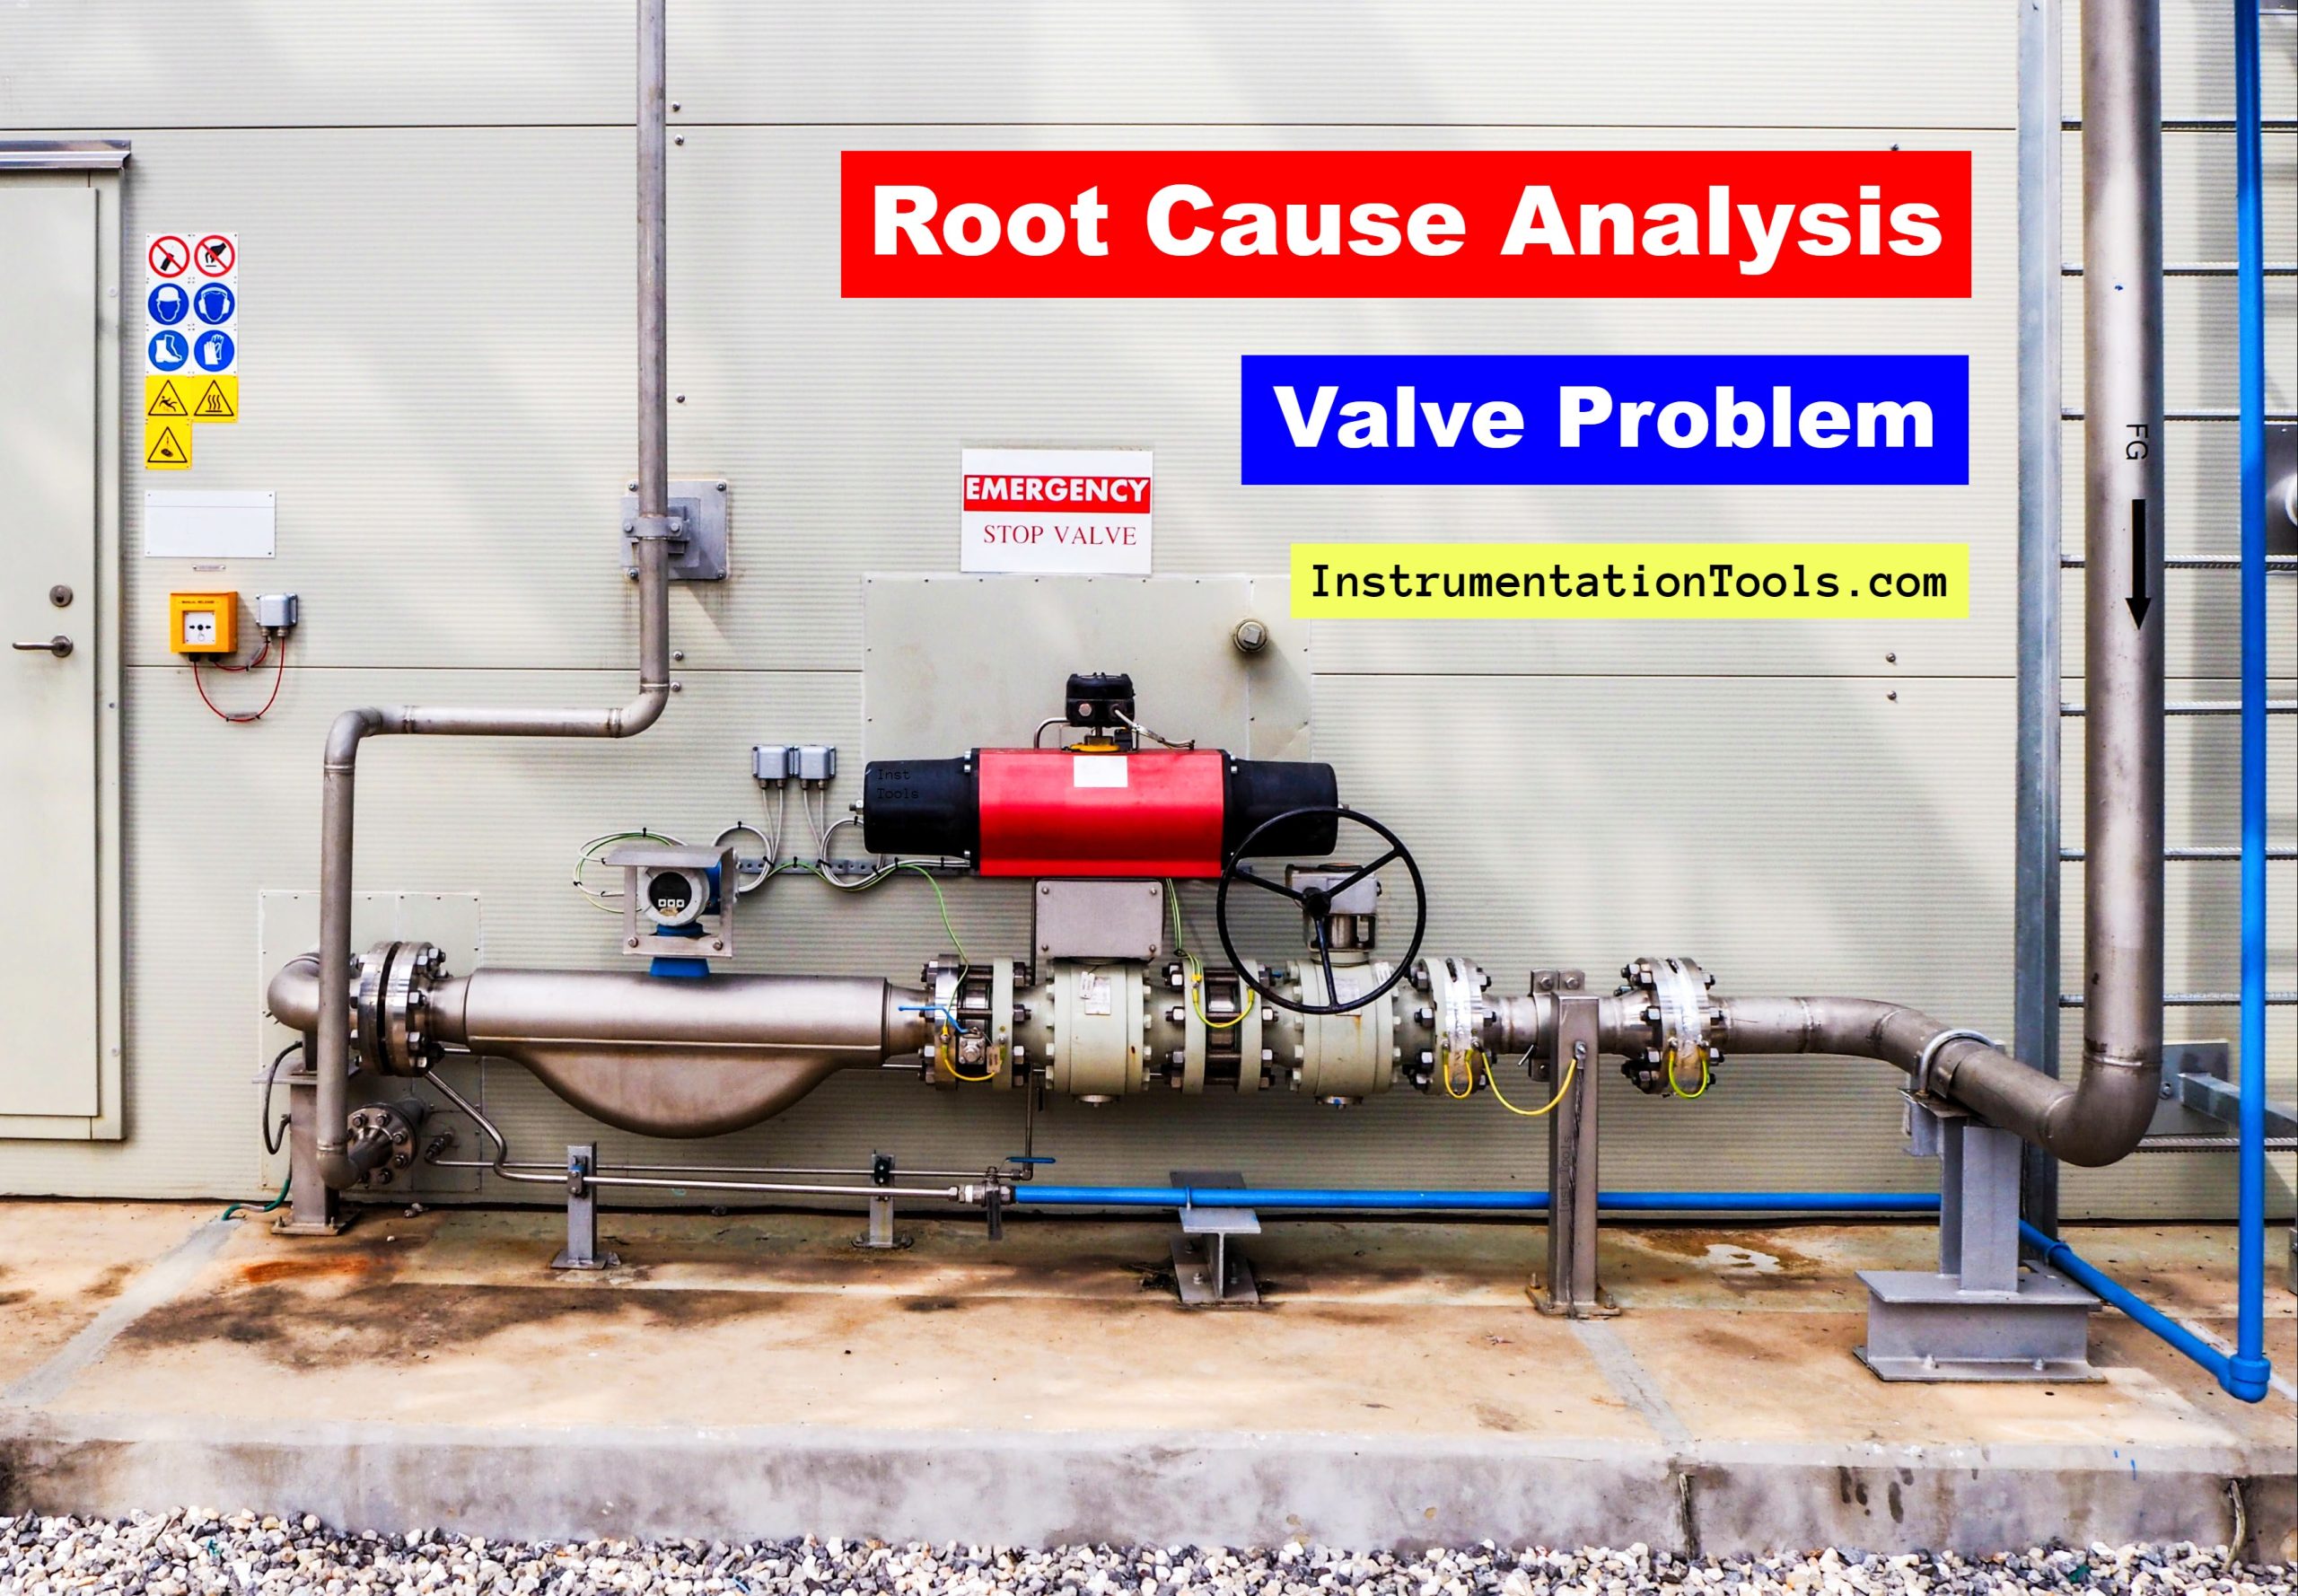 Root Cause Analysis for Valve Problem